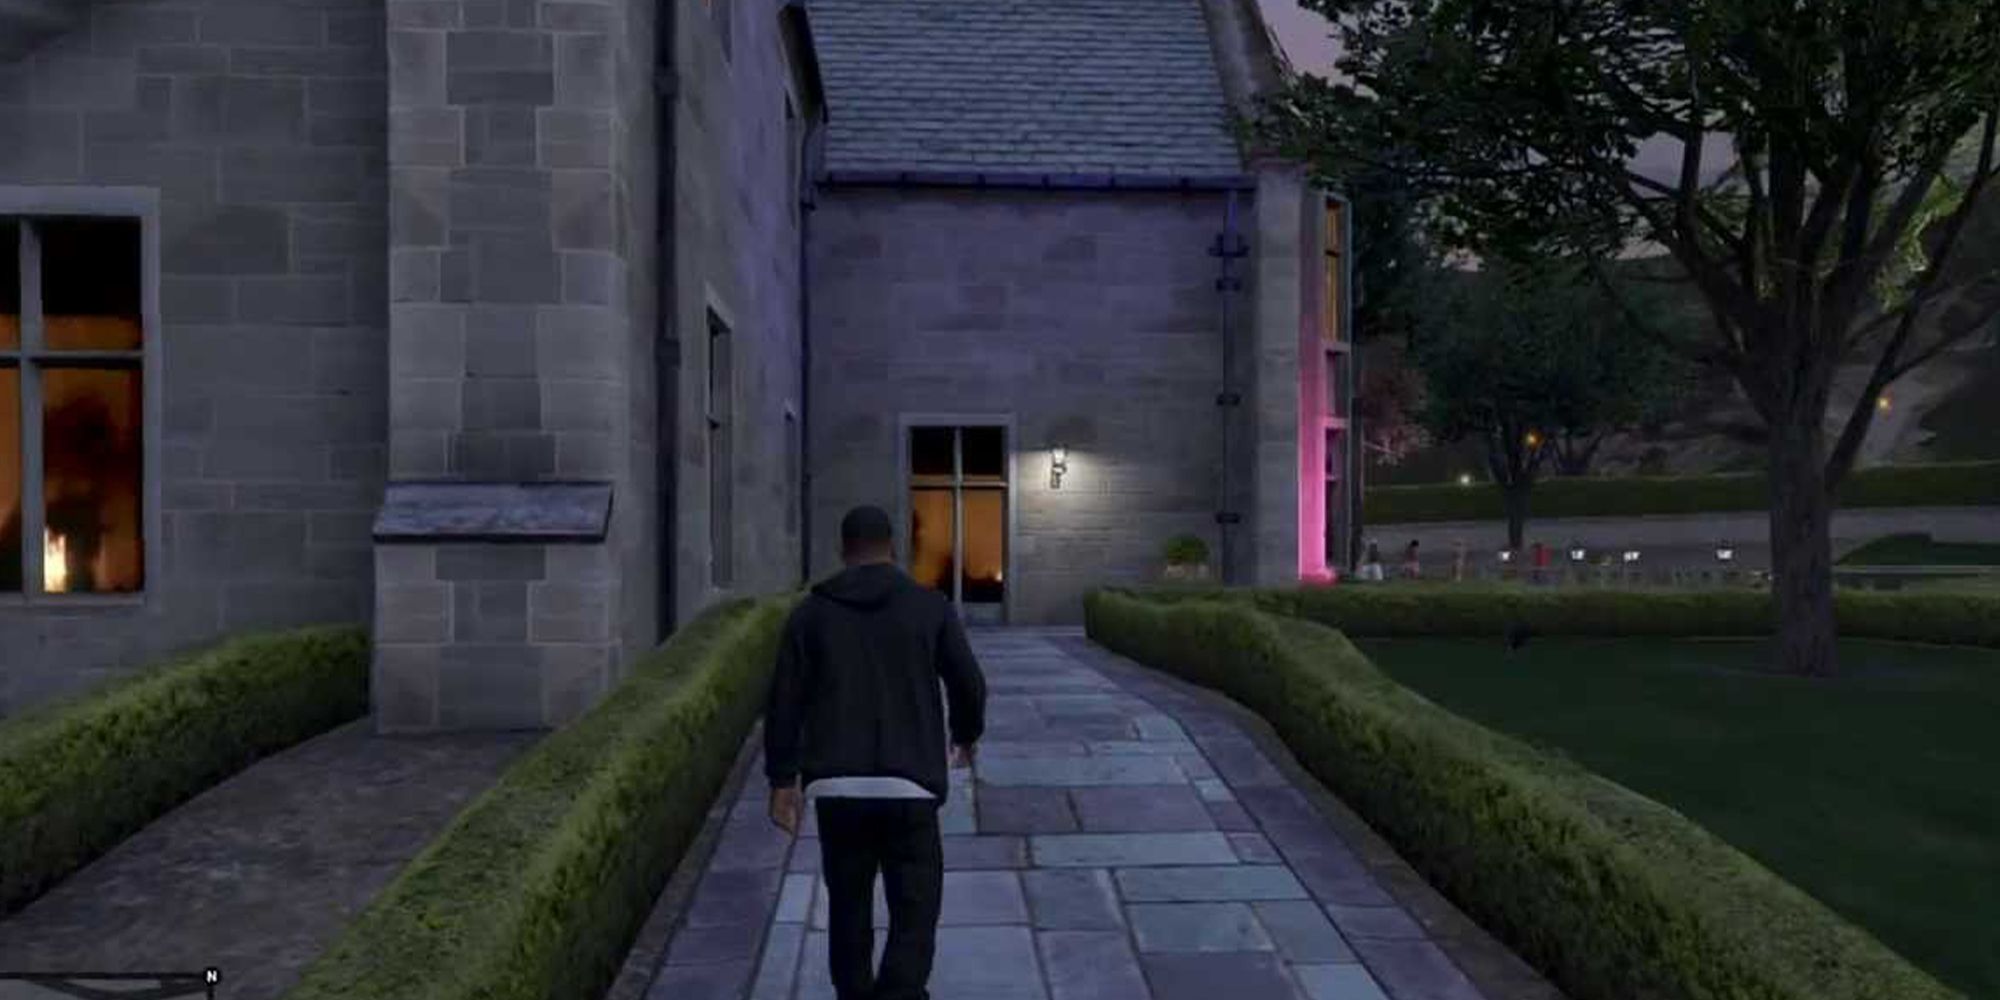 How to Find The Playboy Mansion in GTA Online